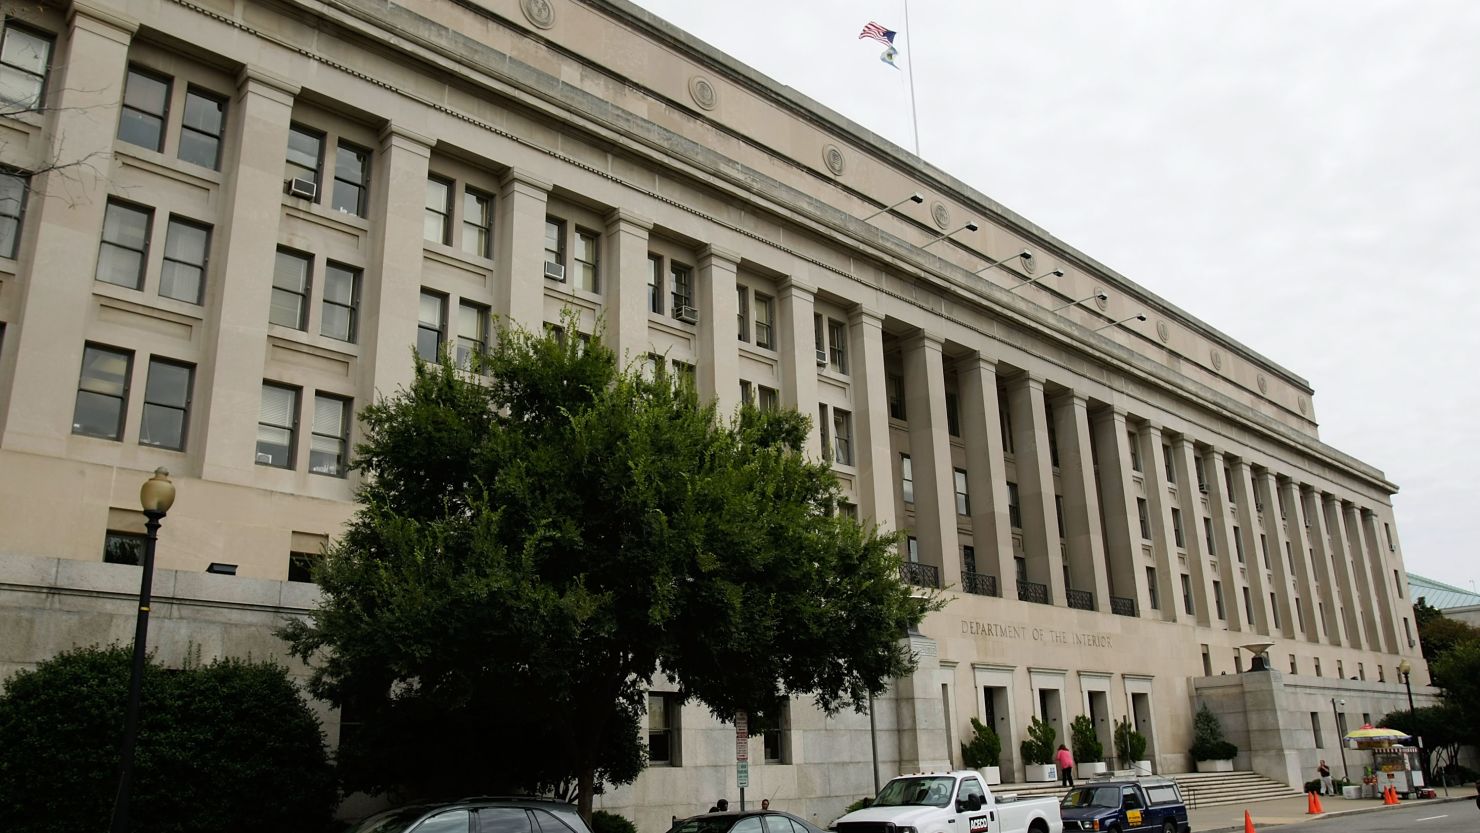 An exterior view of the U.S. Department of The Interior is seen September 11, 2008 in Washington, DC.